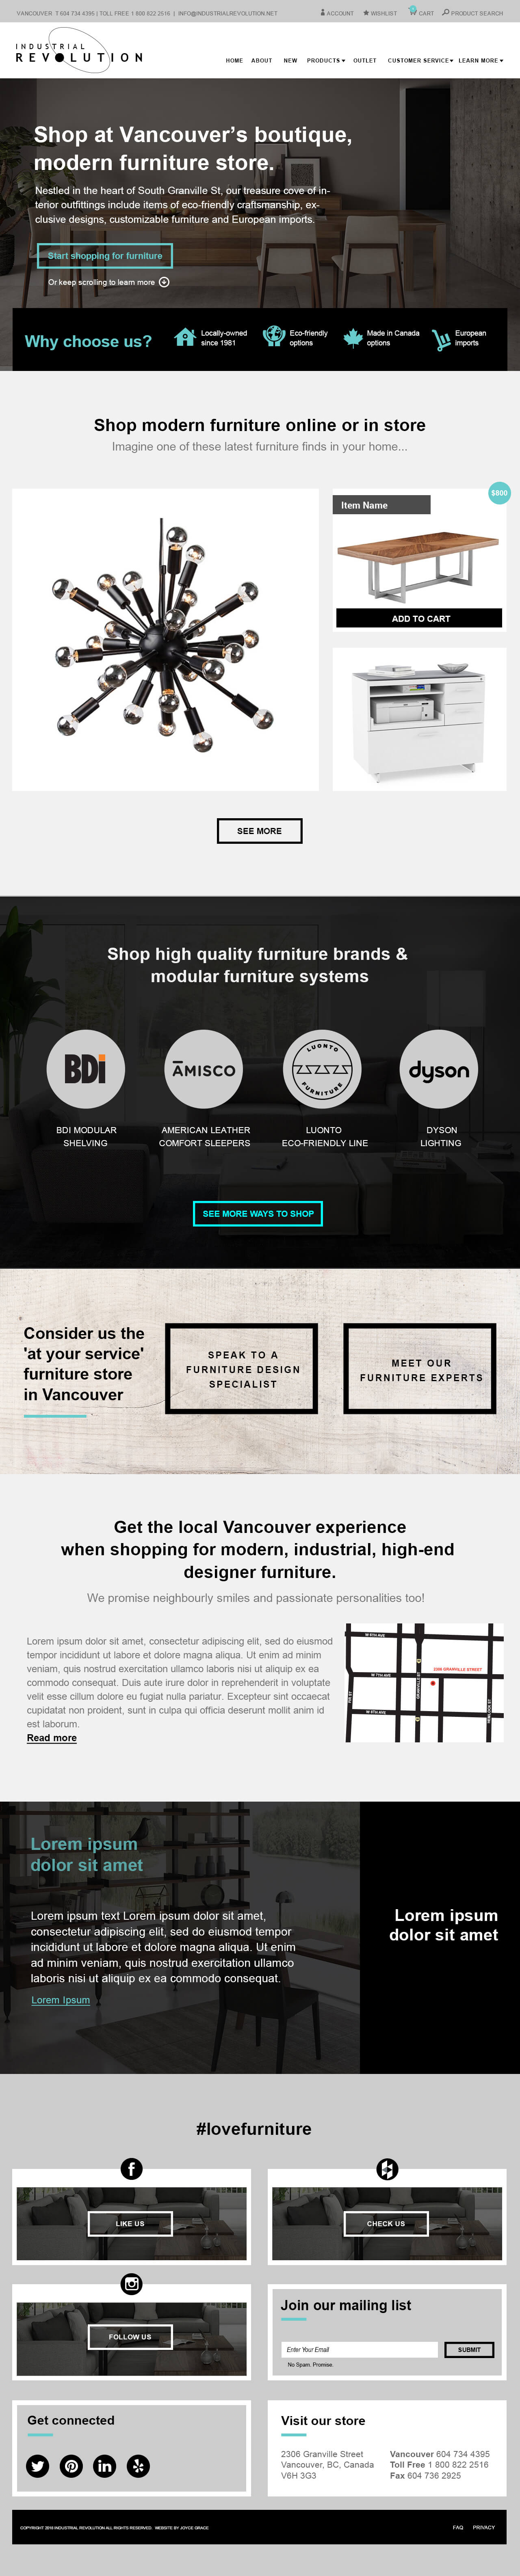 vancouver retail store web design and development home page proof